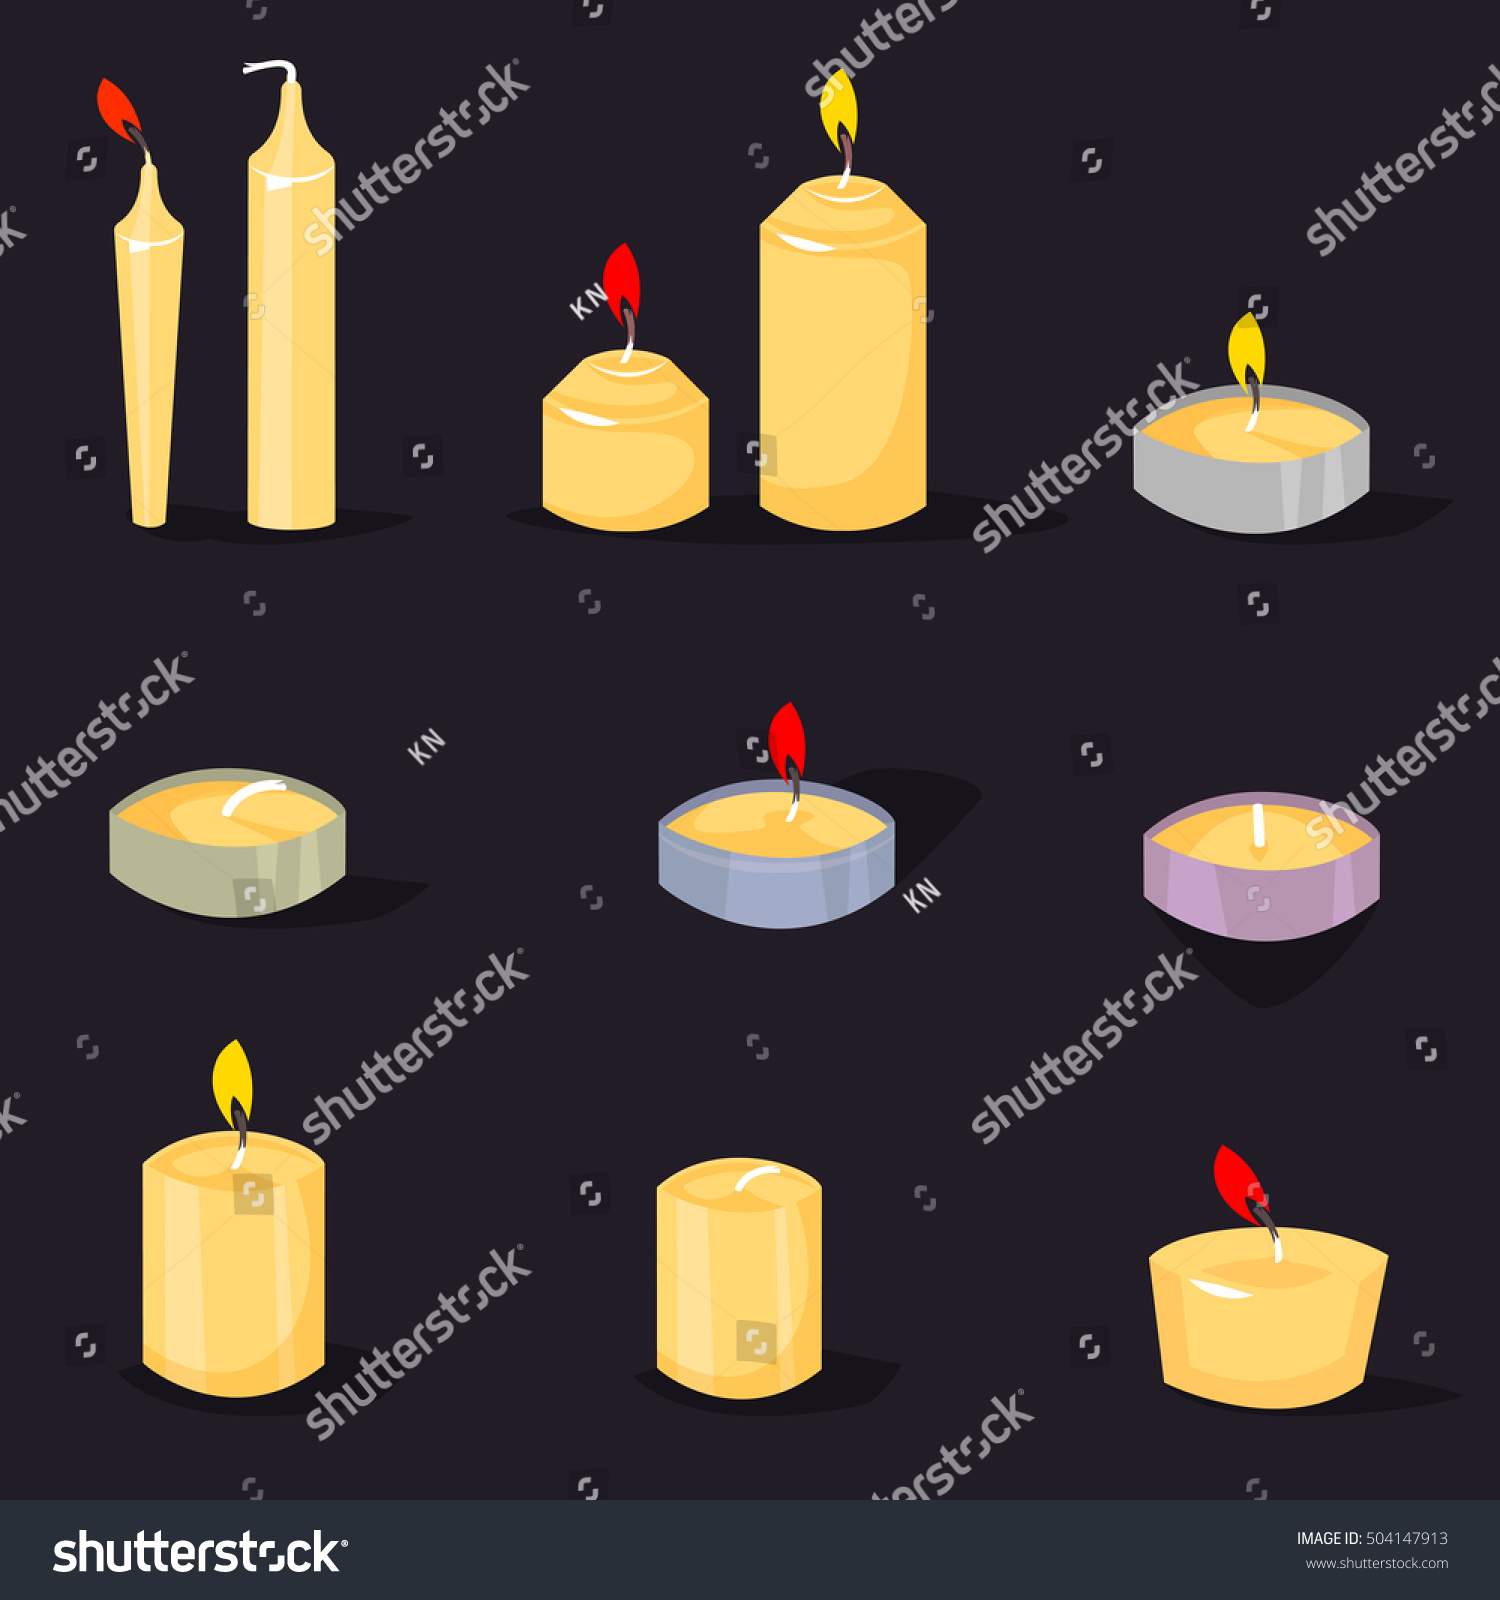 Cartoon Burning Candles Candle Holder Fire Stock Vector 504147913 ...